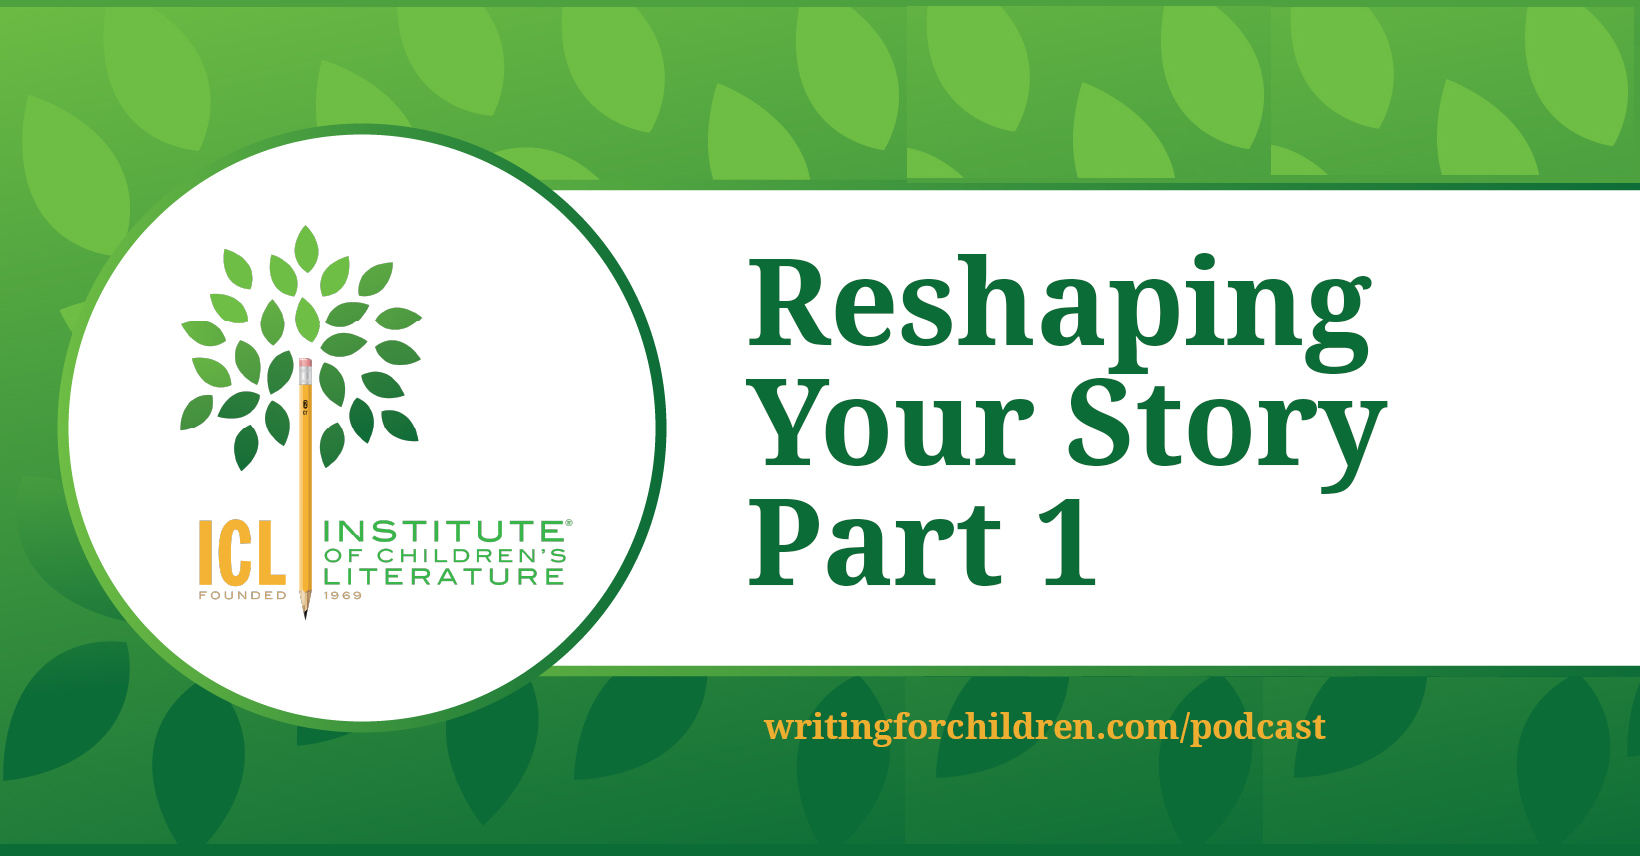 Reshaping-Your-Story-Part-1-episode-167